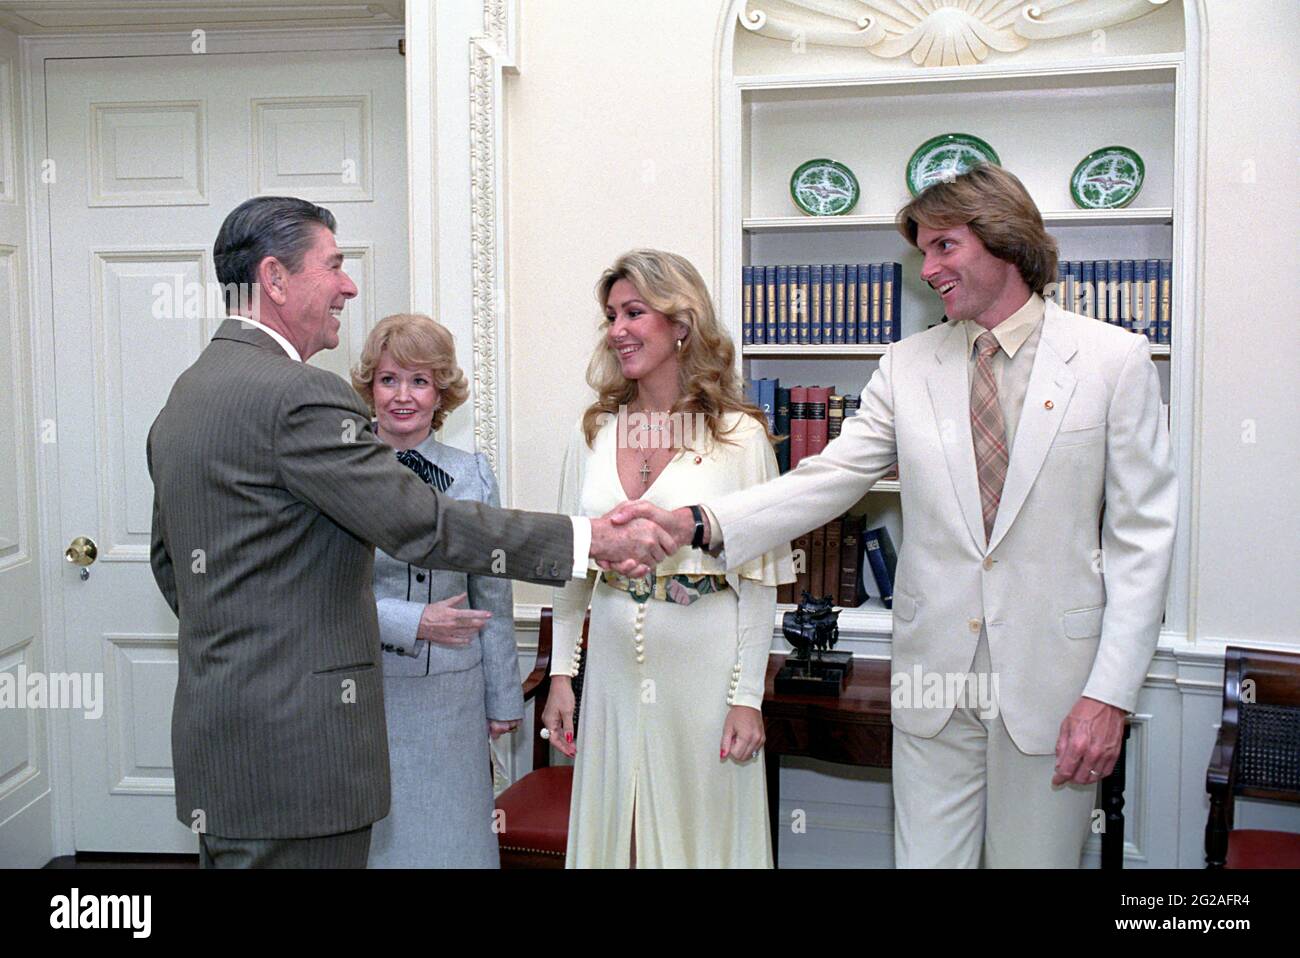 1983 . 3 november, Washington , USA : The celebrated american future Female transgender CAITLYN JENNER ( William Bruce Jenner , born in 1949 ) when was young . President of United States RONAL REAGAN Shaking Hands with Bruce Jenner with his Wife Linda Jenner and Margaret Heckler at a Signing Ceremony for Proclamation for ' National Diabetes Month ' in Oval Office . Jenner is today a Media personality , socialite , political candidate and retired Olympic gold medal-winning decathlete . Unknown photographer from White House Photographic Office .- HISTORY - FOTO STORICHE - personalità da giovane Stock Photo